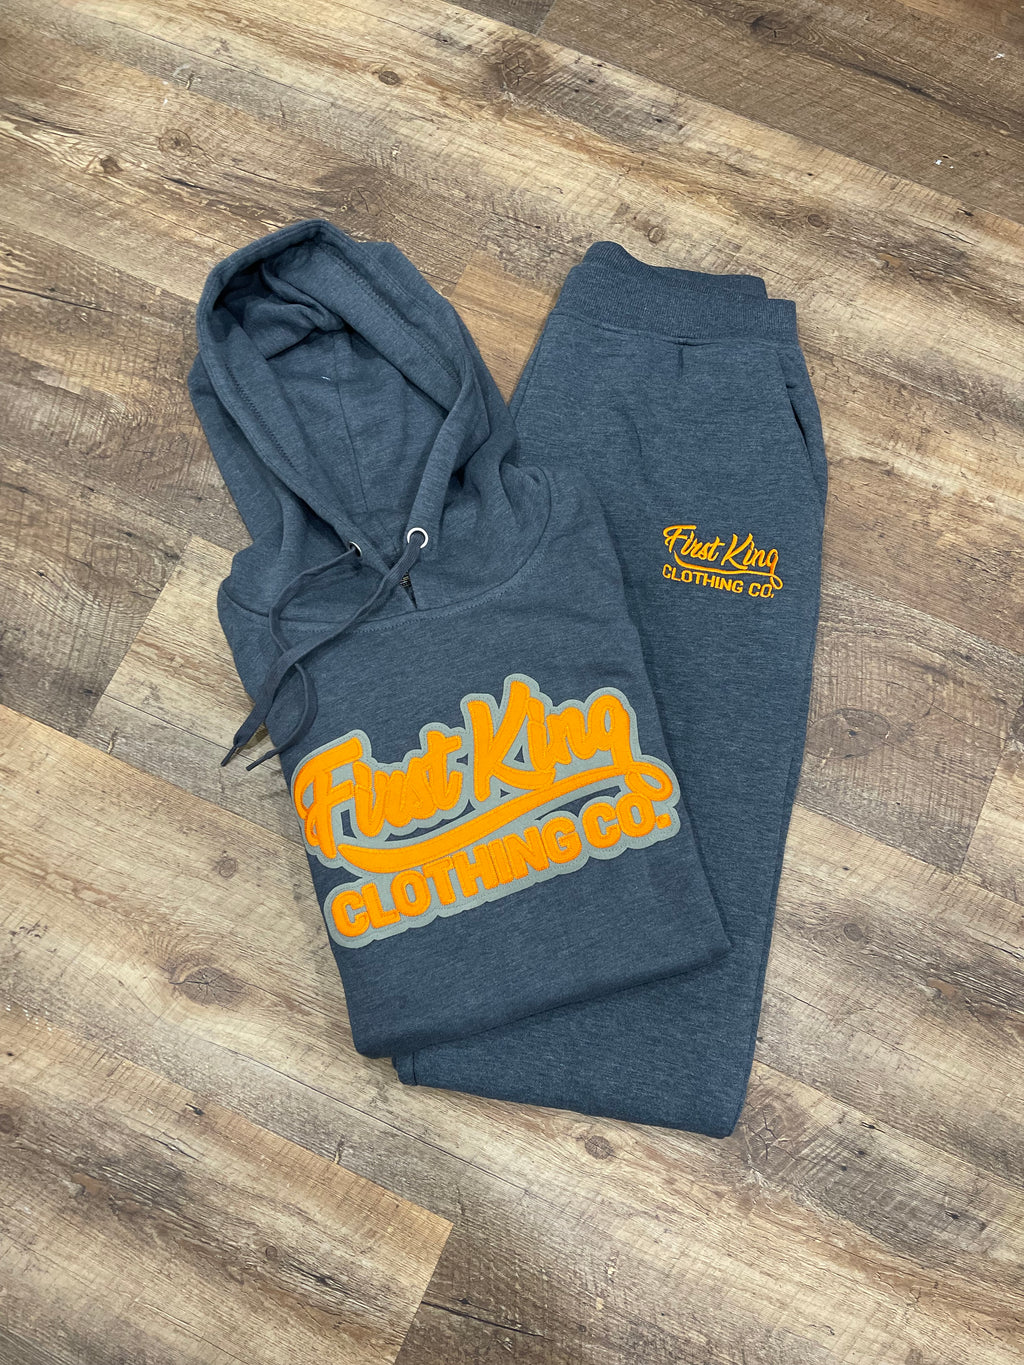 Charcoal Grey And Orange Jogging Suit